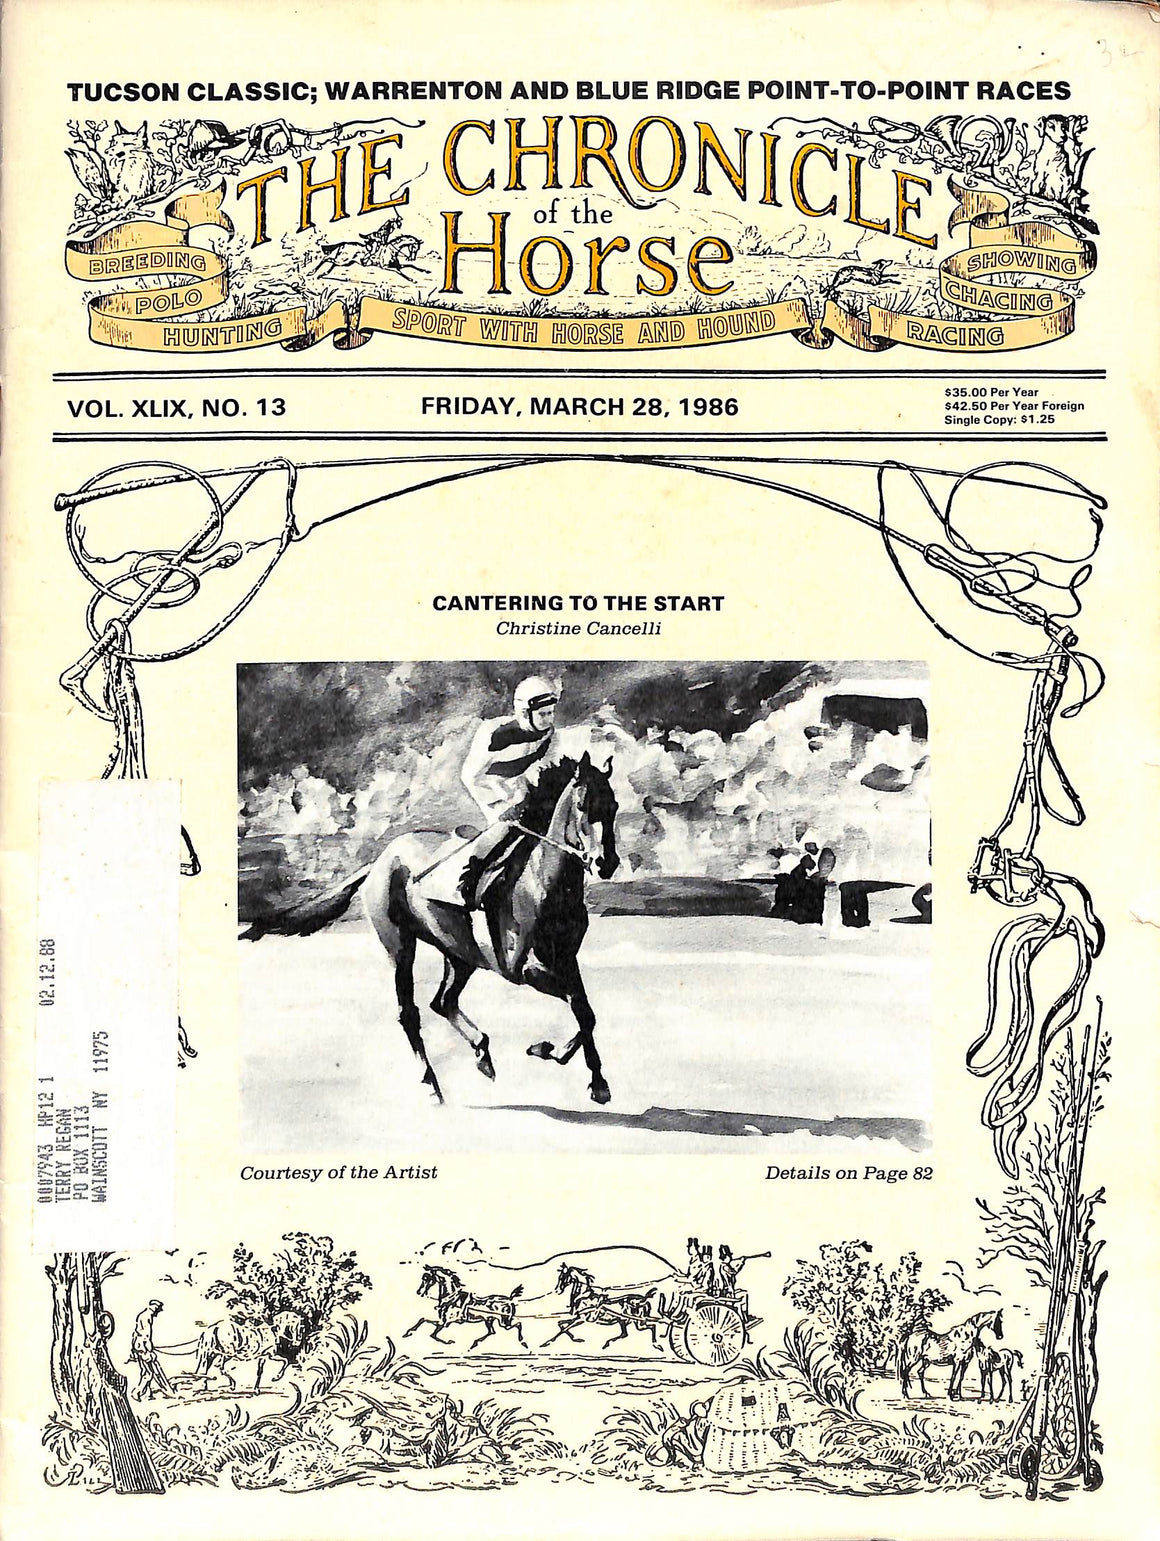 The Chronicle of the Horse: Vol. XLIX, No. 13 - March 28, 1986